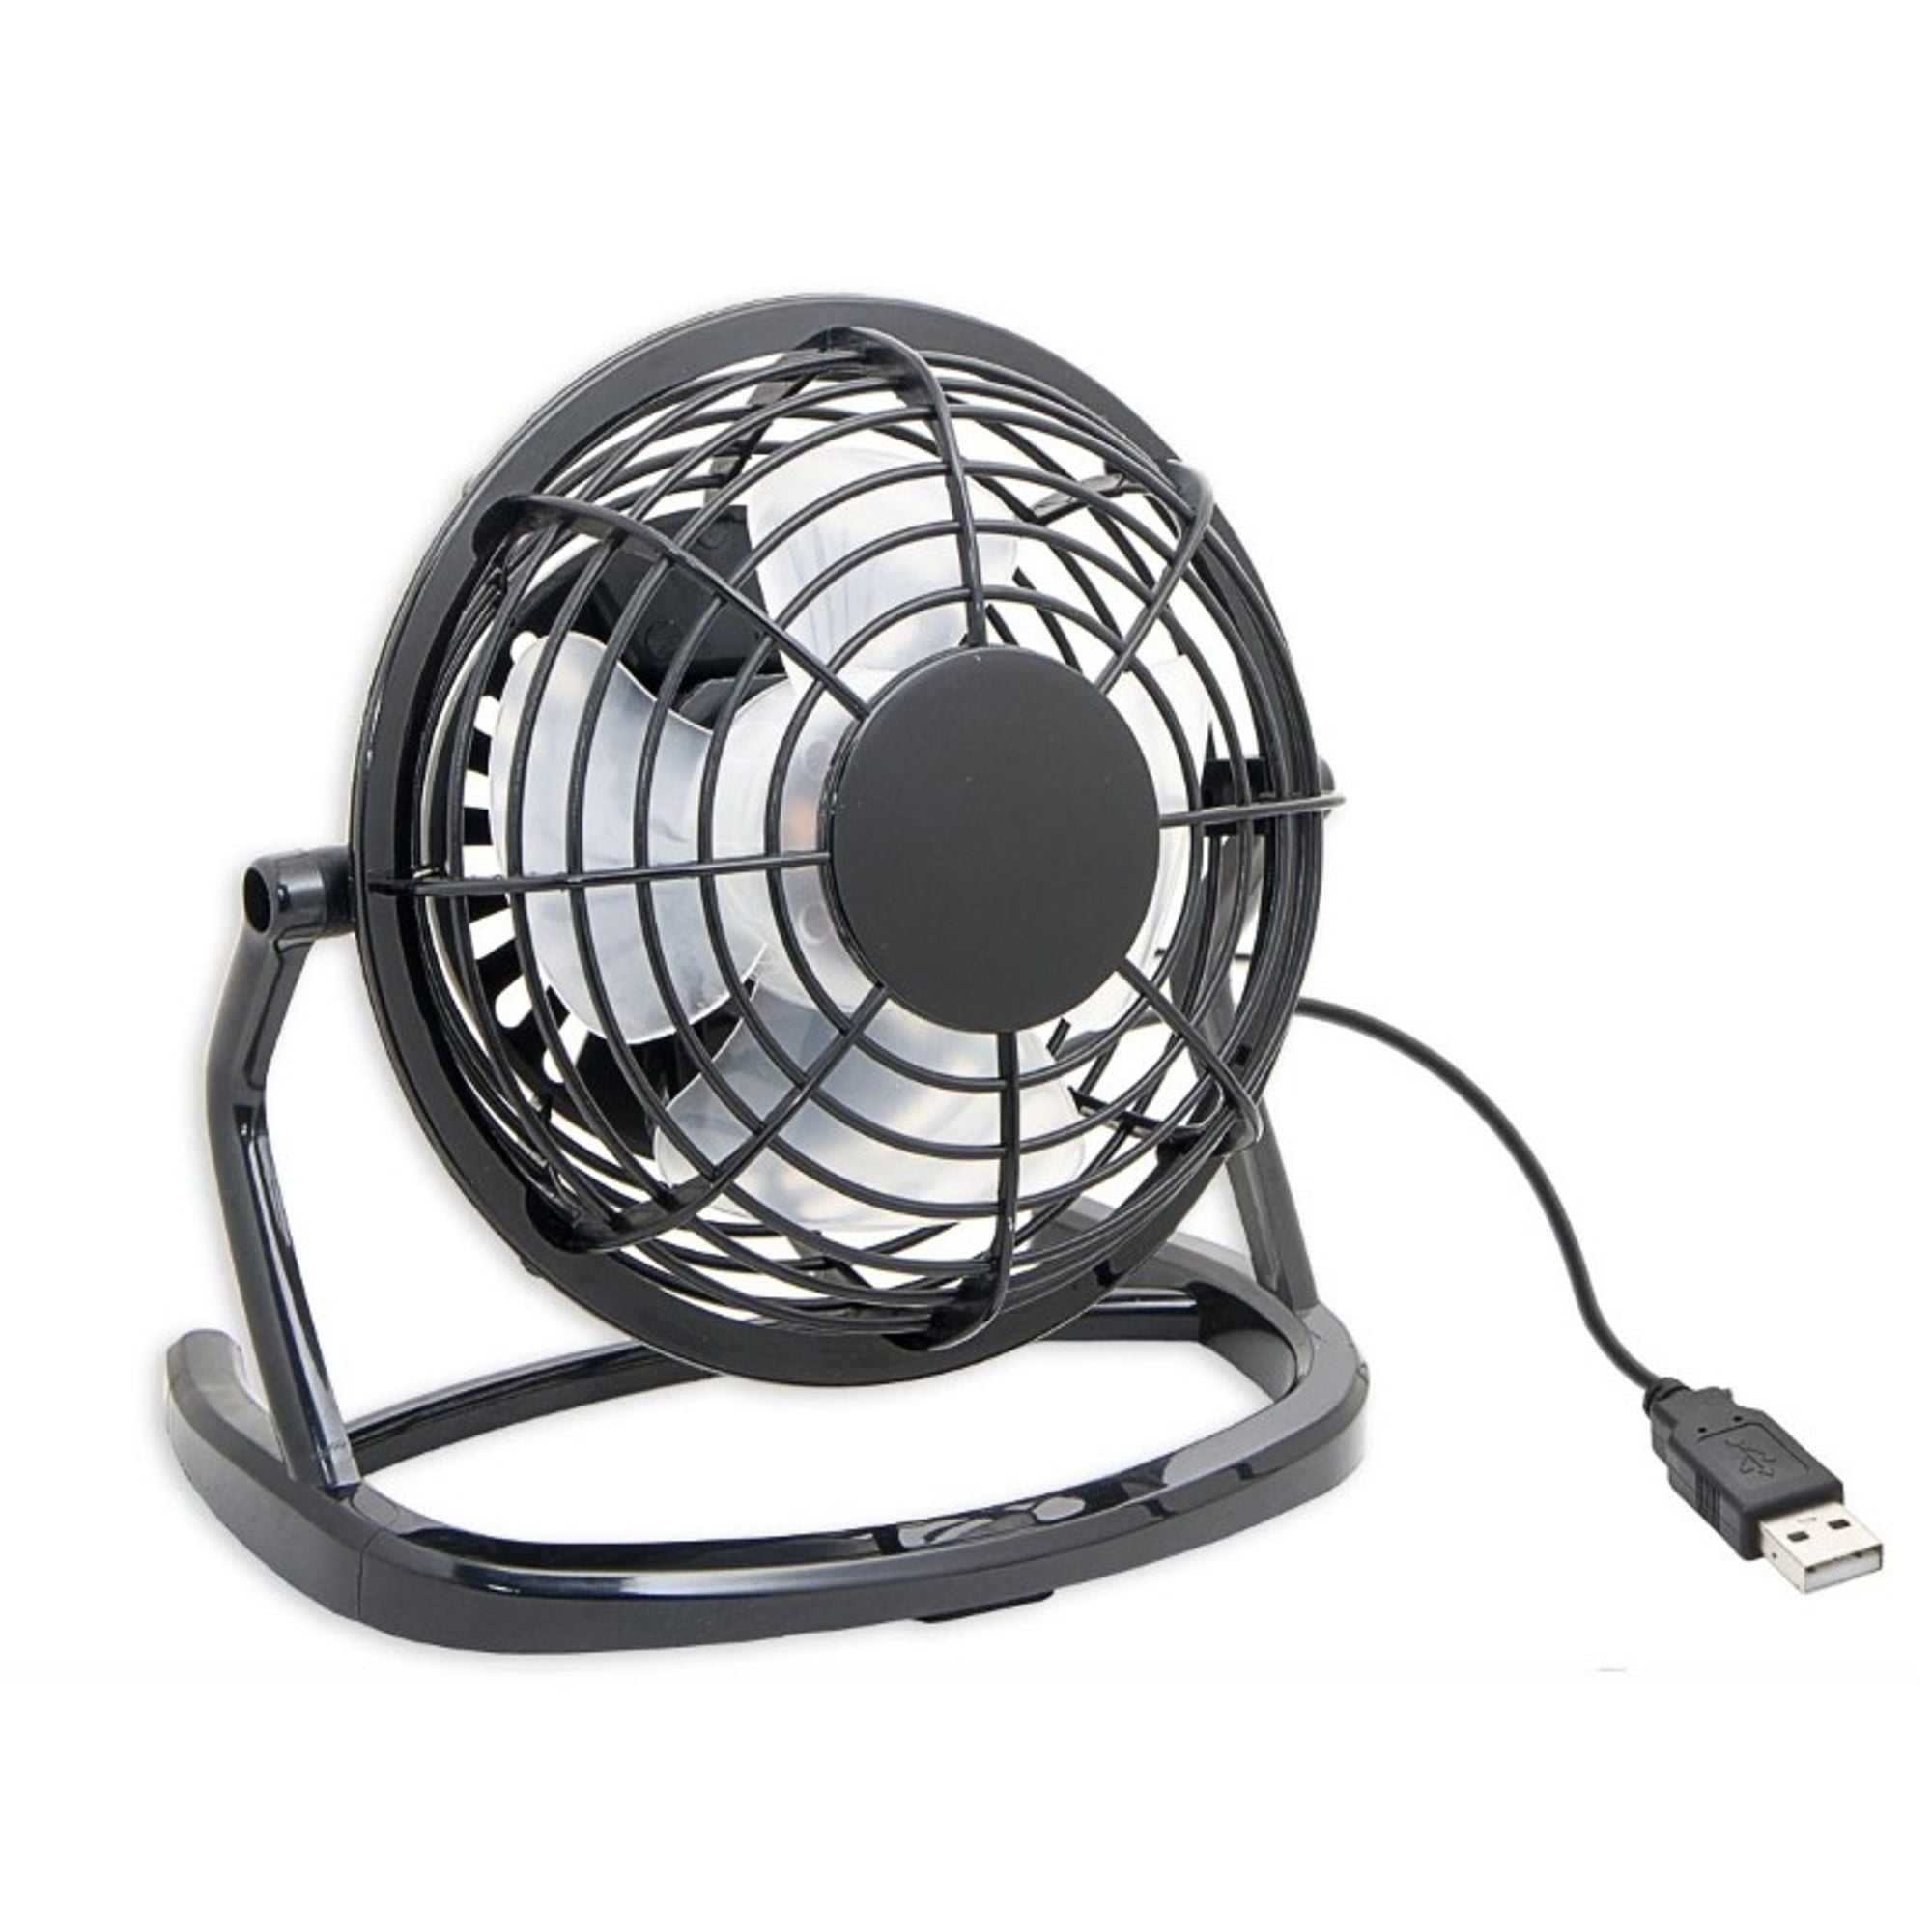 NOMSOCR 3 Speed Desk Table Fans with USB Powered USB Desk Fan Yellow Quiet Cooling Fan Portable Lightweight for Home Office Car Outdoor Travel 